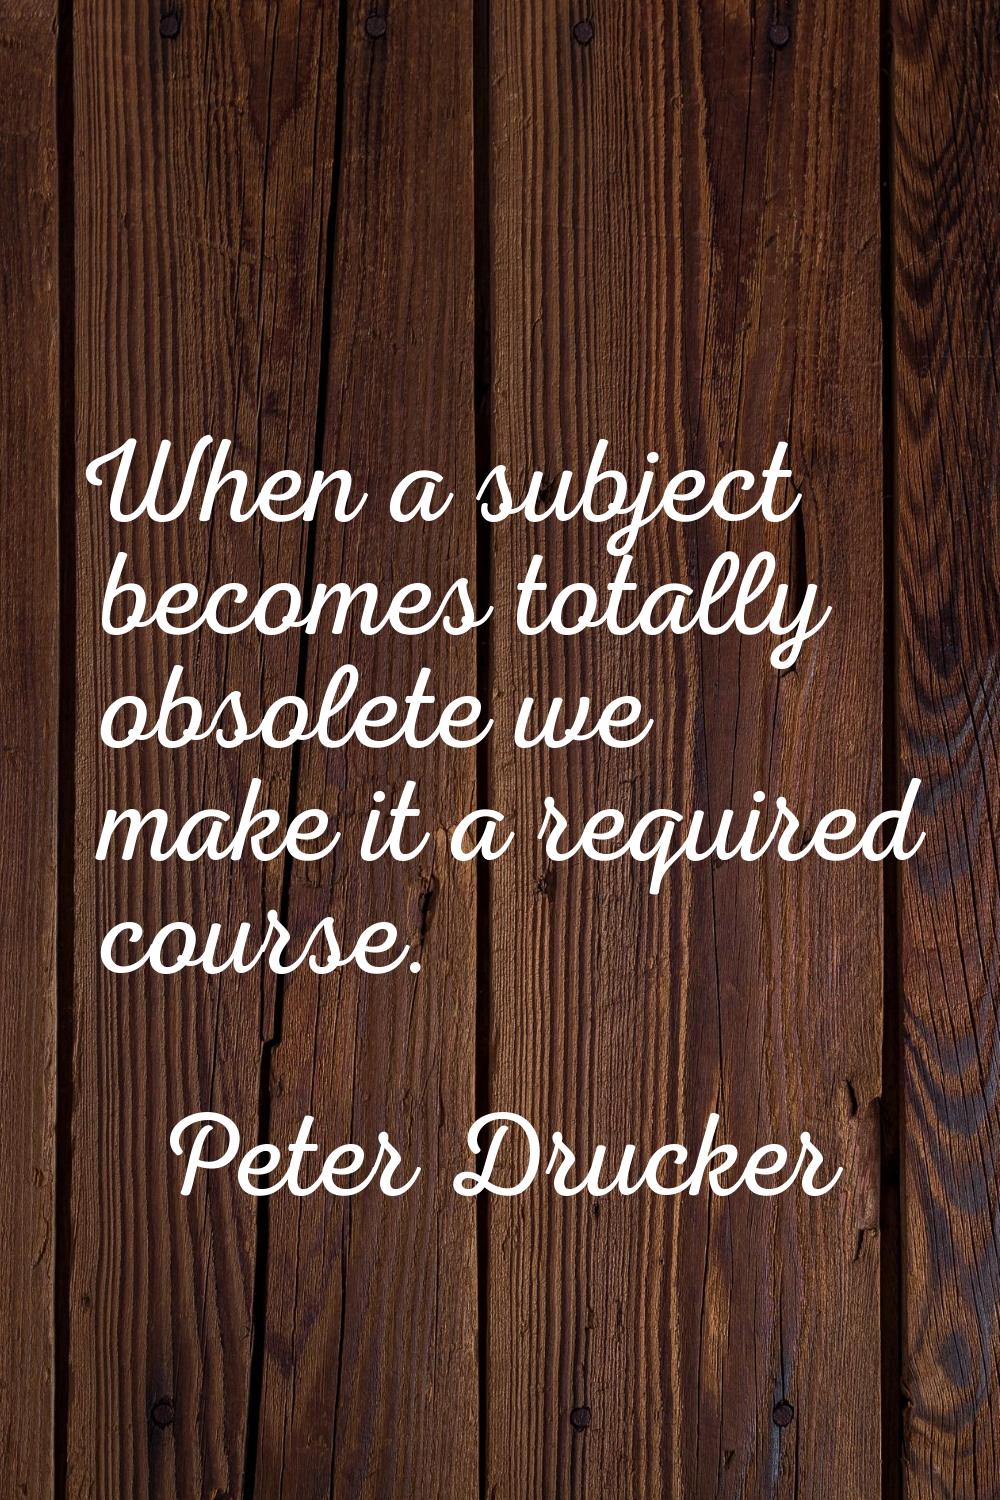 When a subject becomes totally obsolete we make it a required course.